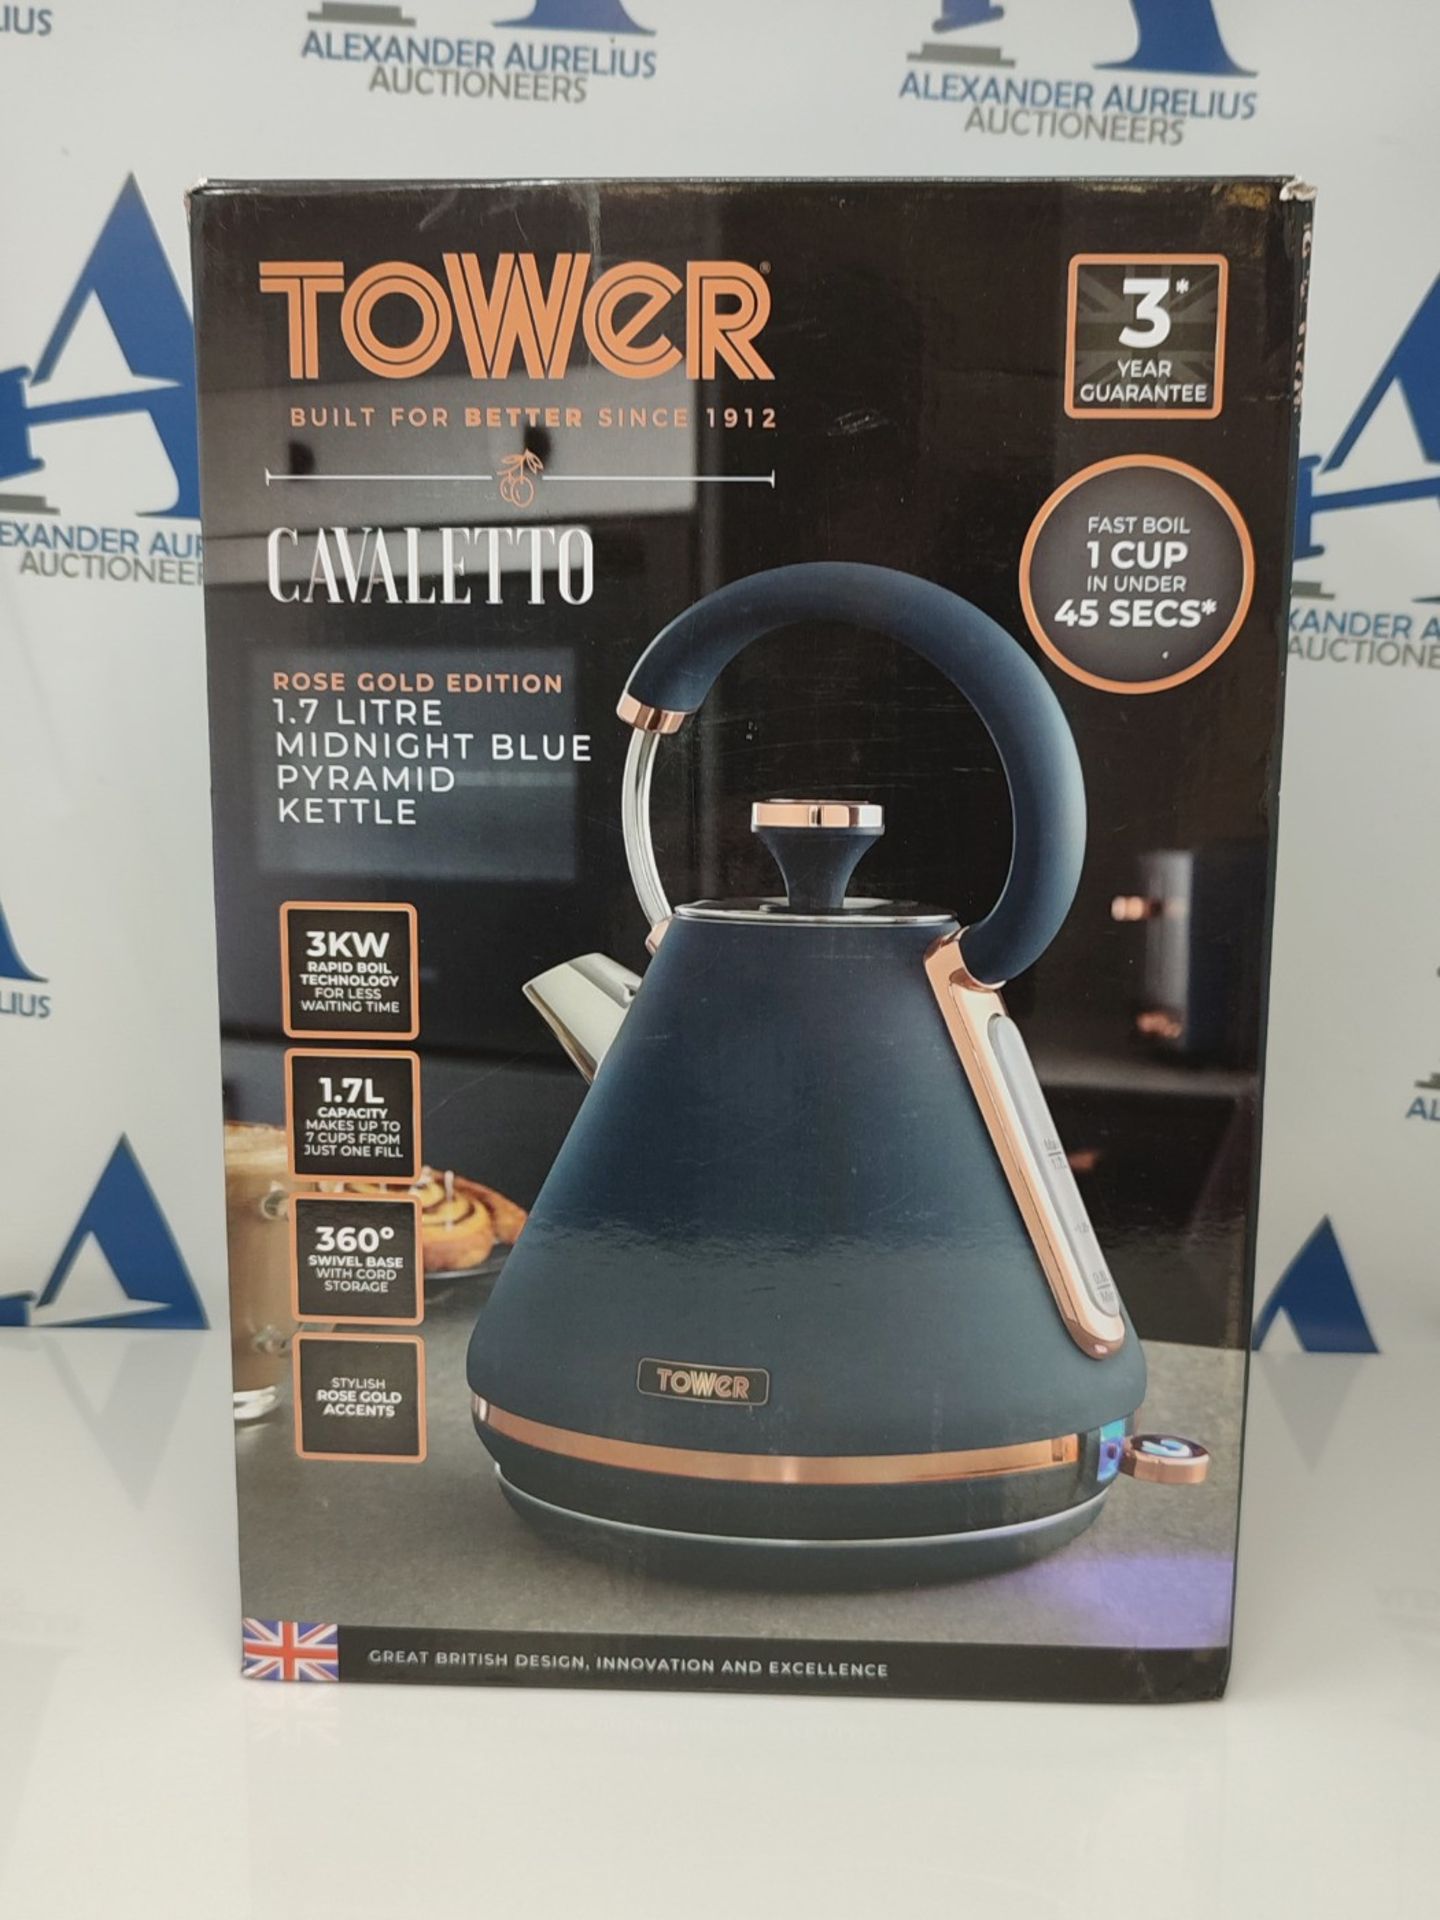 Tower T10044MNB Cavaletto Pyramid Kettle with Fast Boil, Detachable Filter, 1.7 Litre, - Image 2 of 3